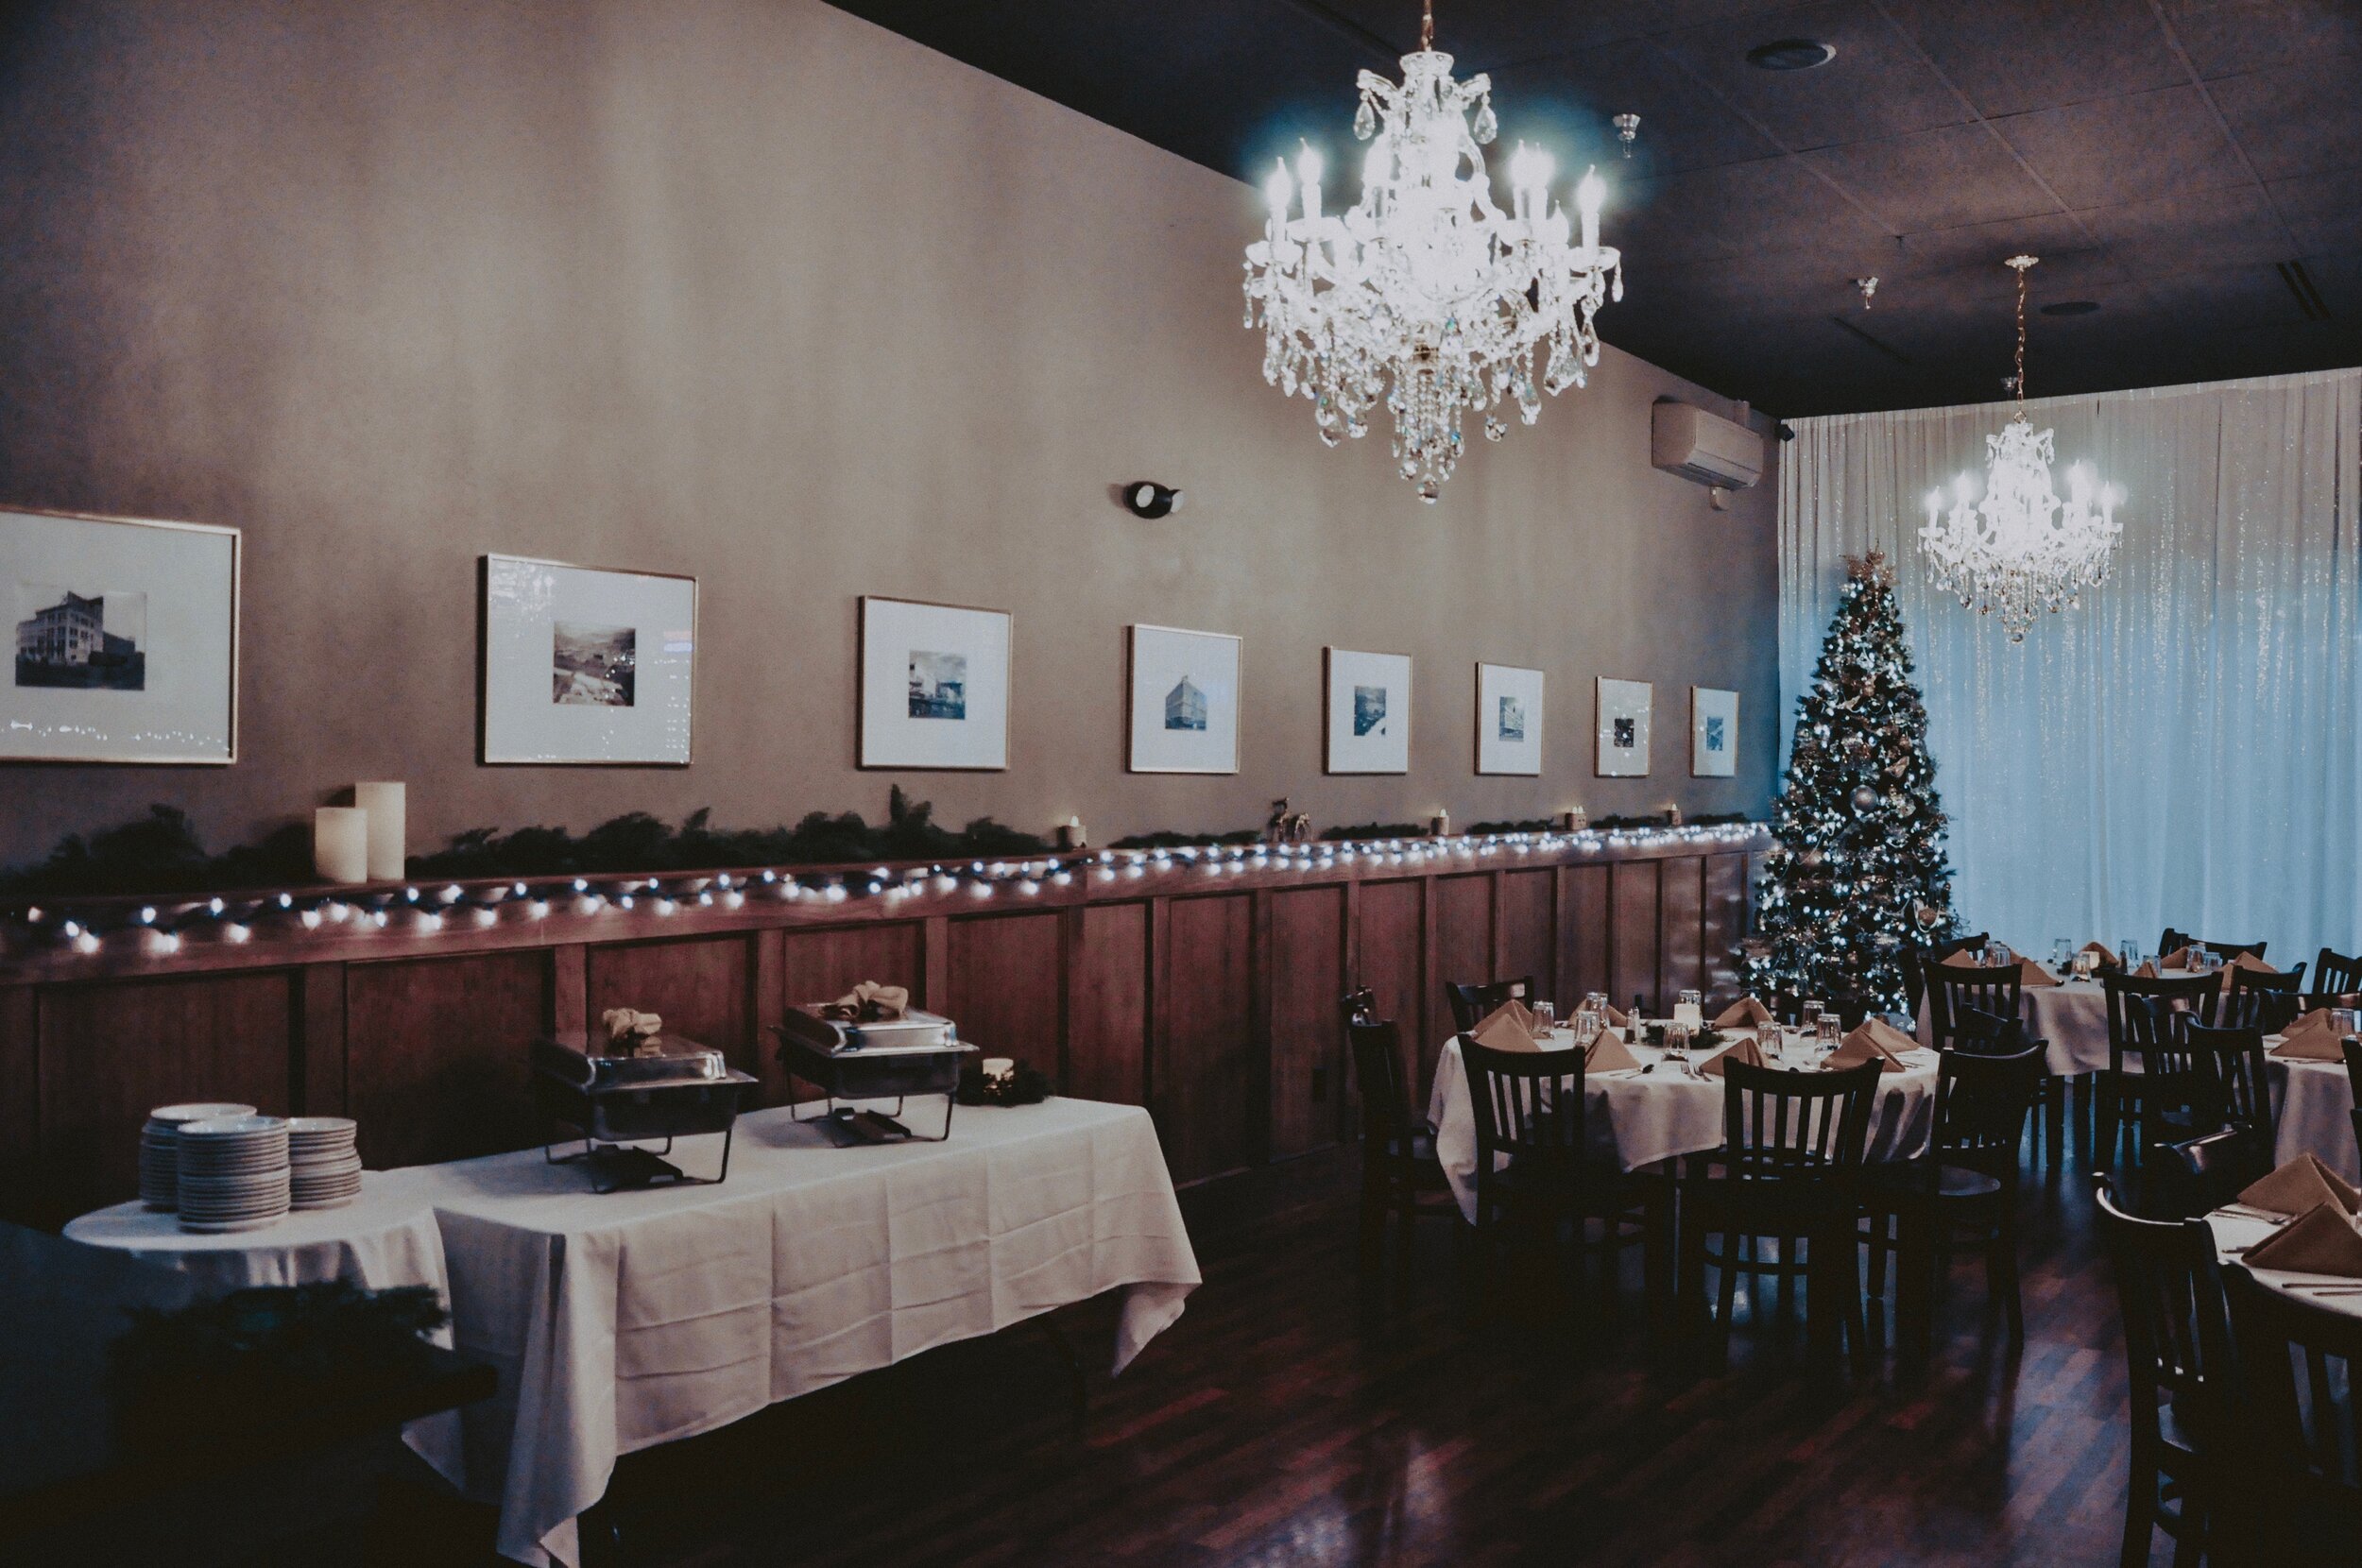 Banquet Hall During Holidays Pic.JPG